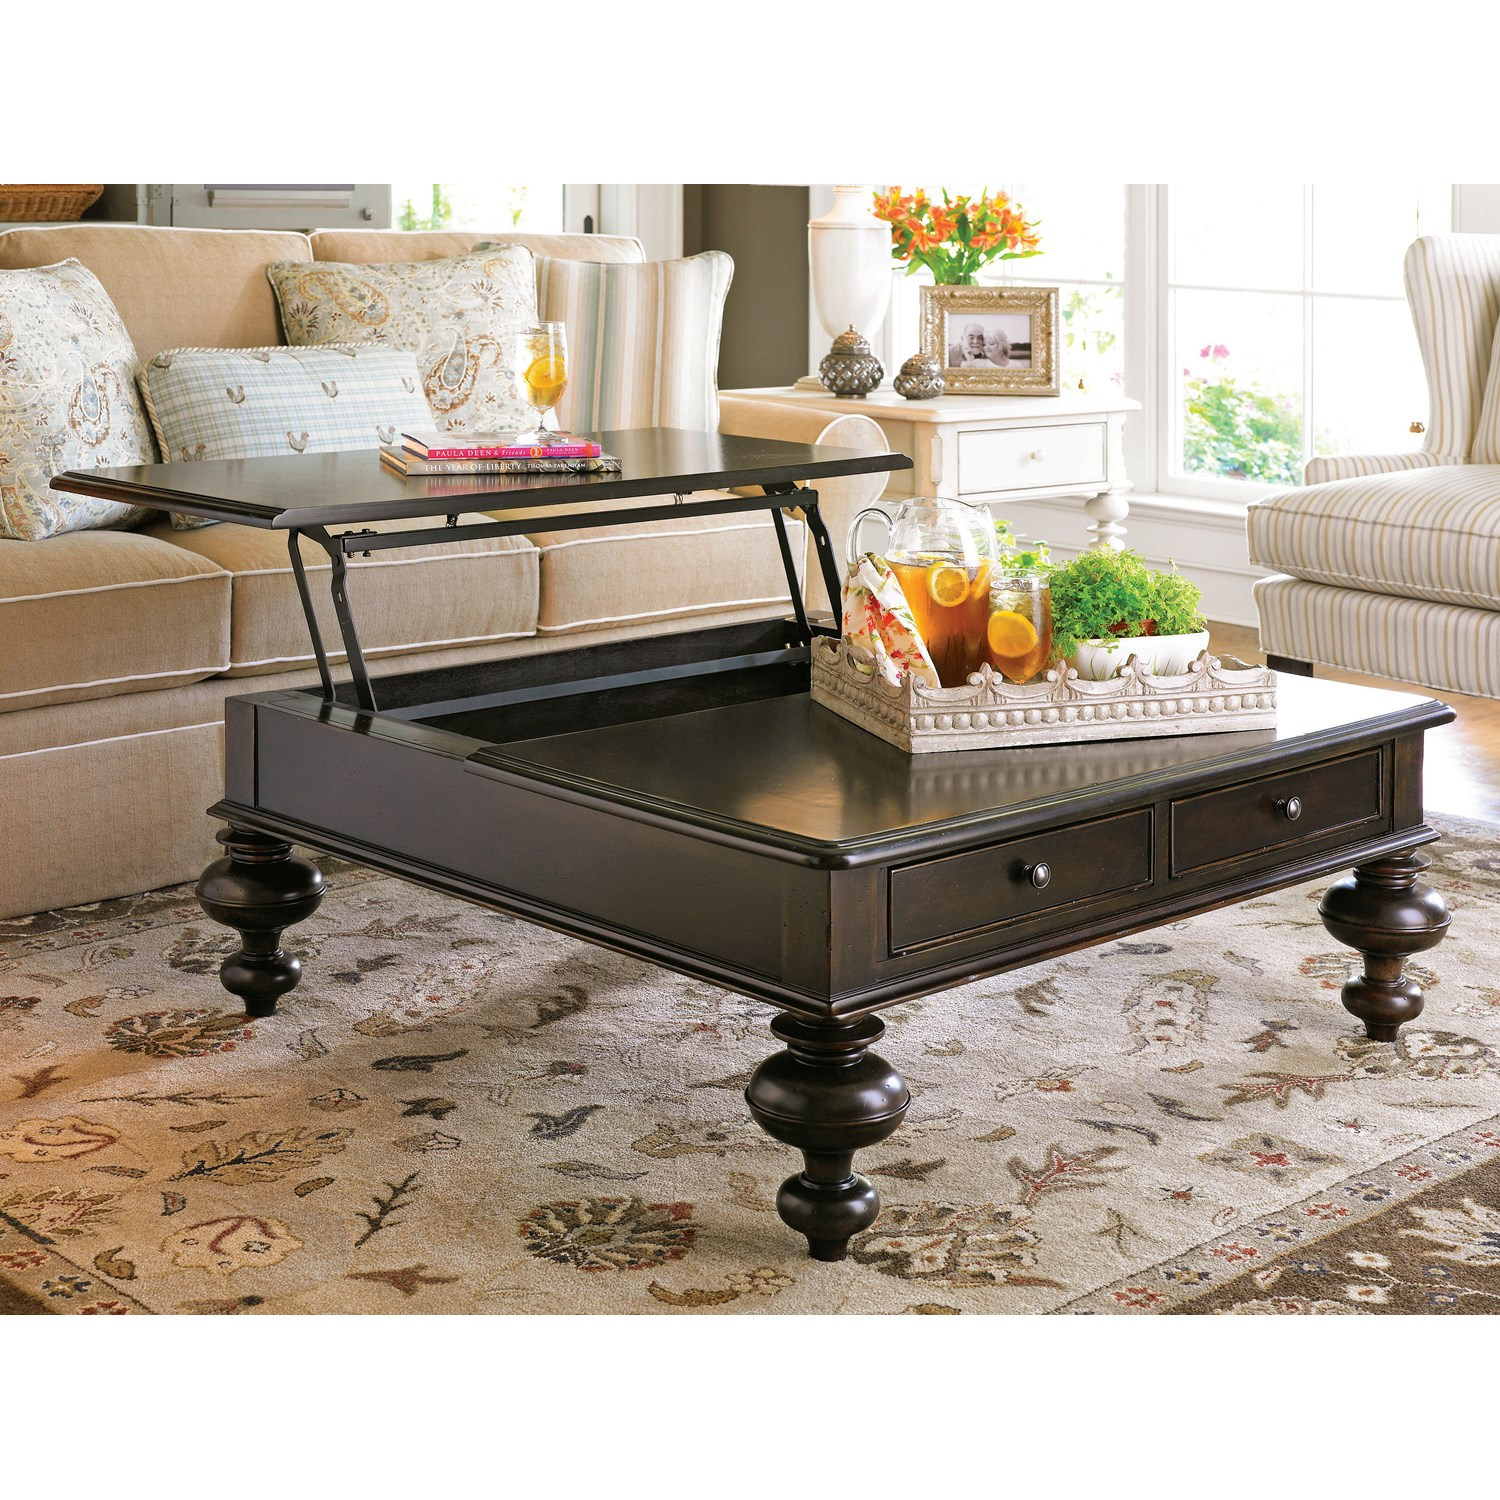 Paula Deen Home Put Your Feet Up Top Lift Coffee Table 932801 inside sizing 1500 X 1500